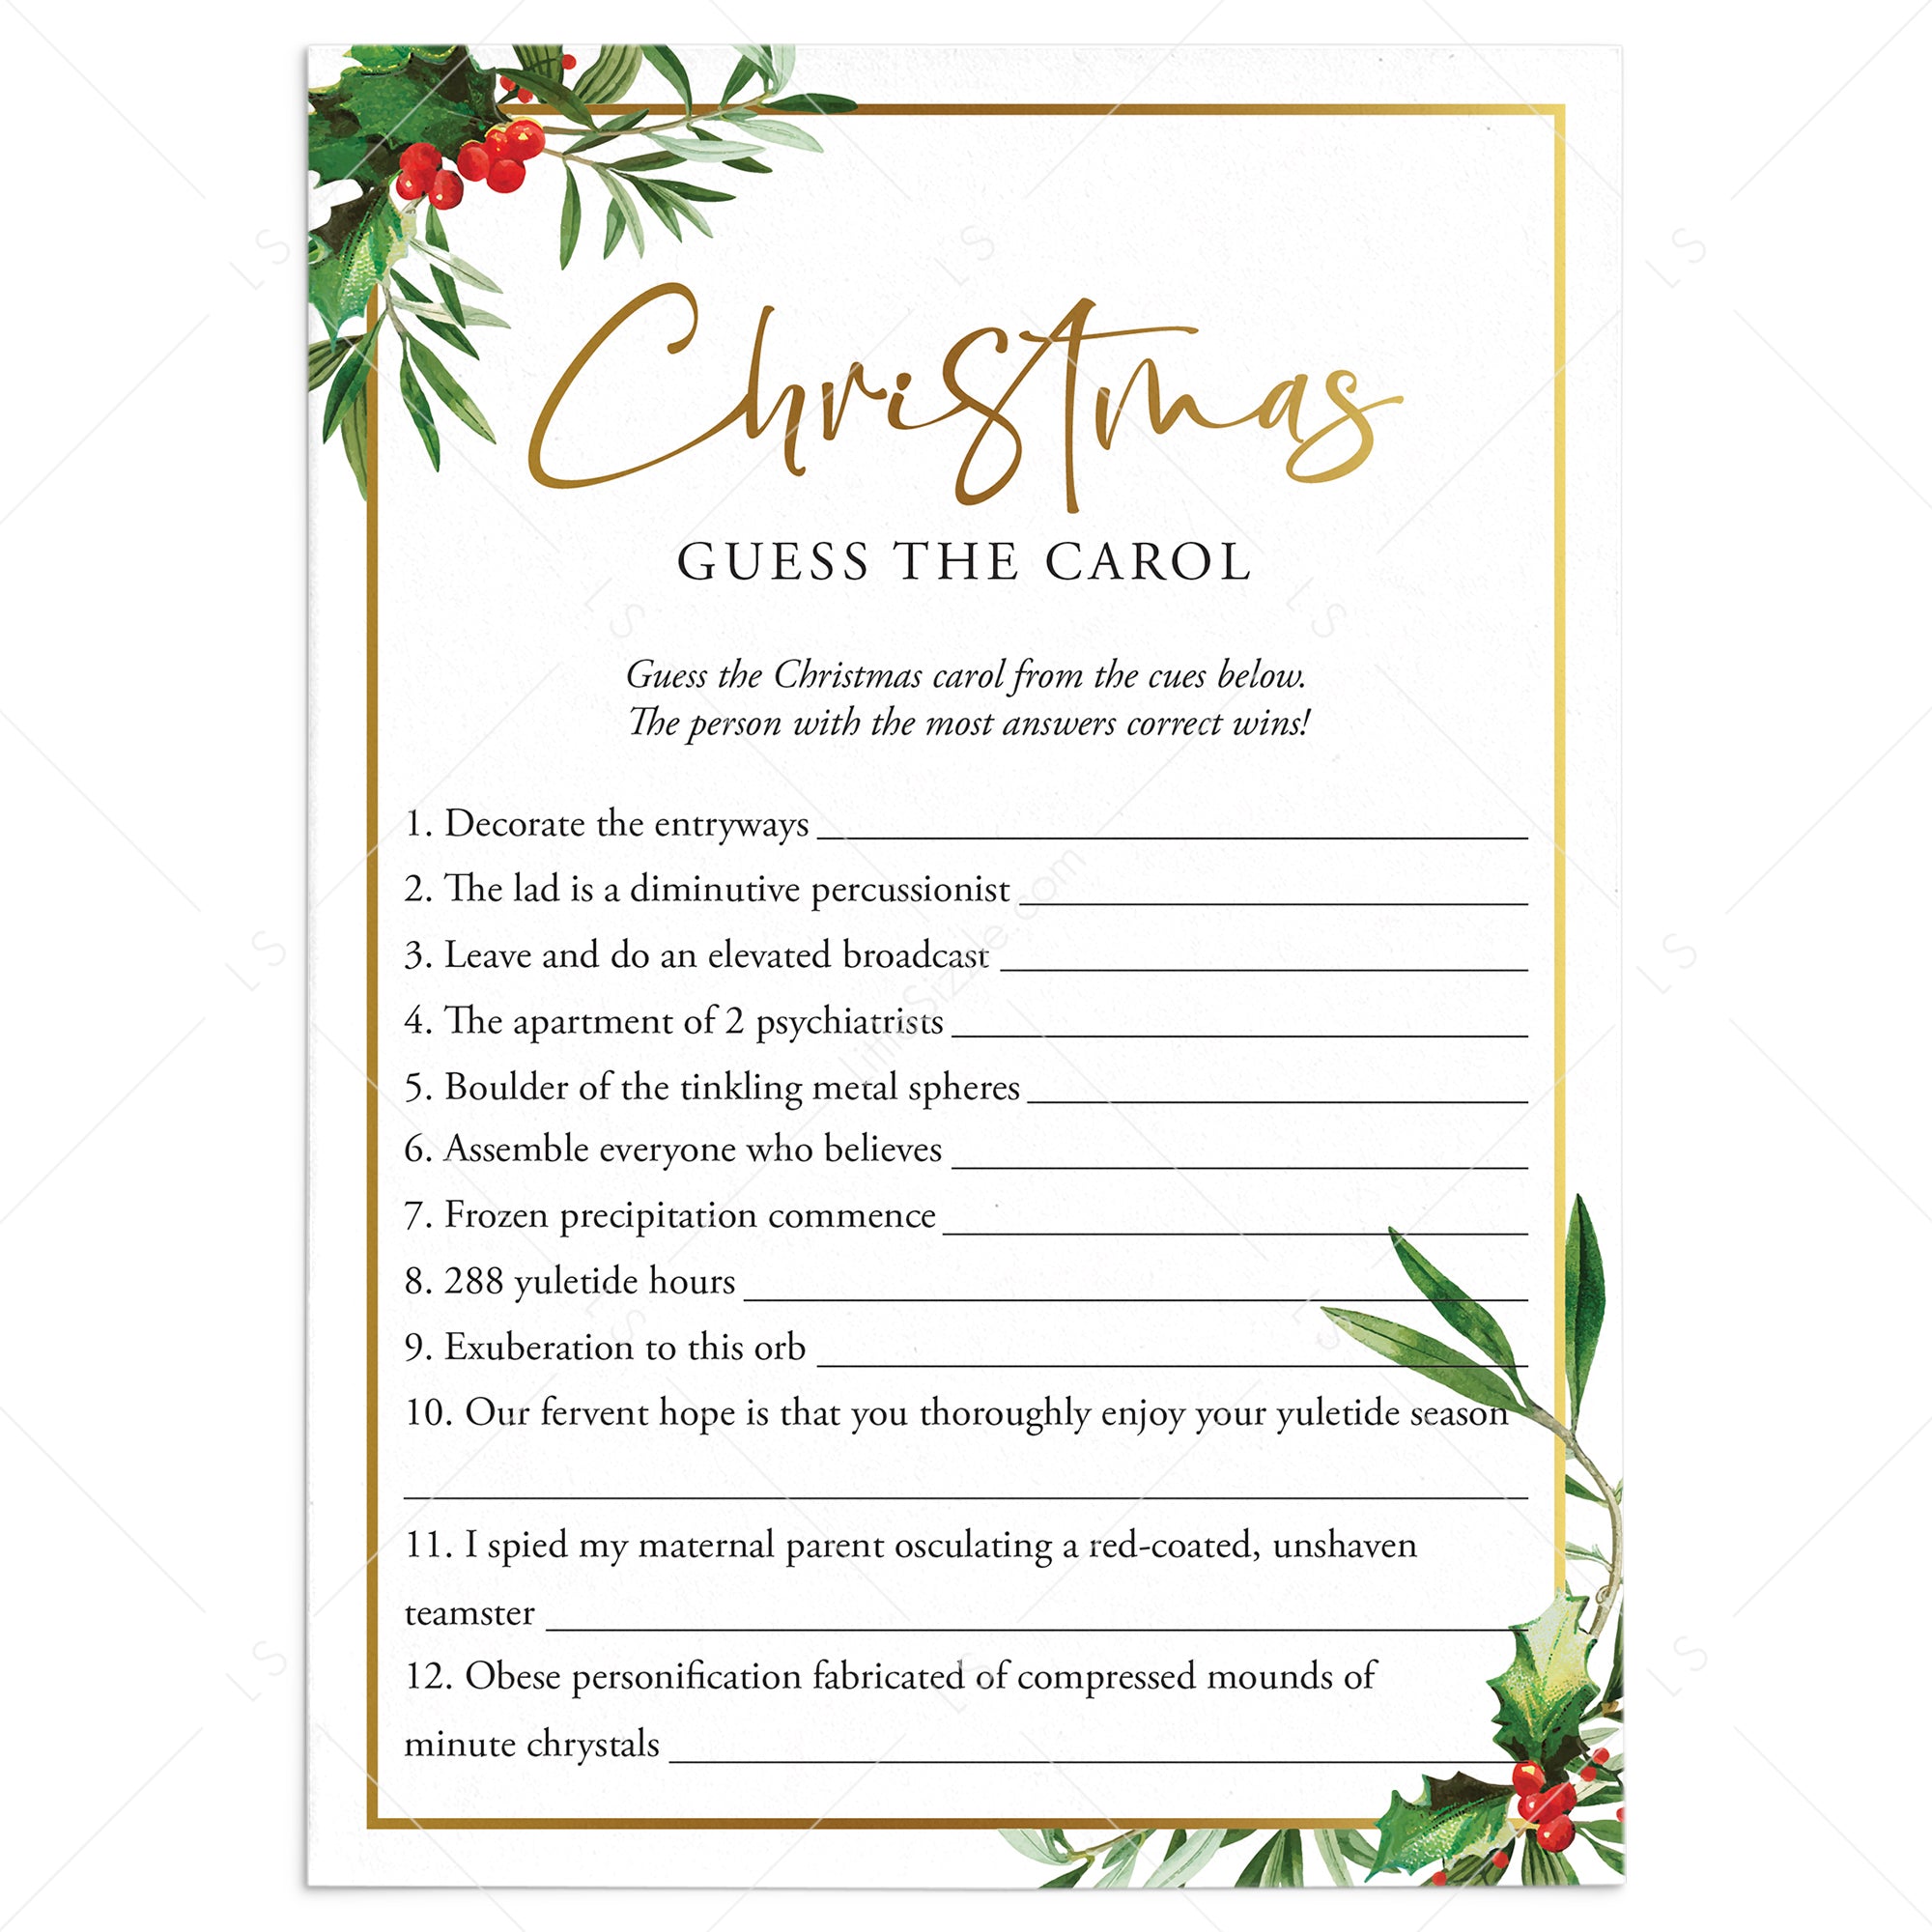 Christmas Song Riddles Quiz With Answers Printable by LittleSizzle